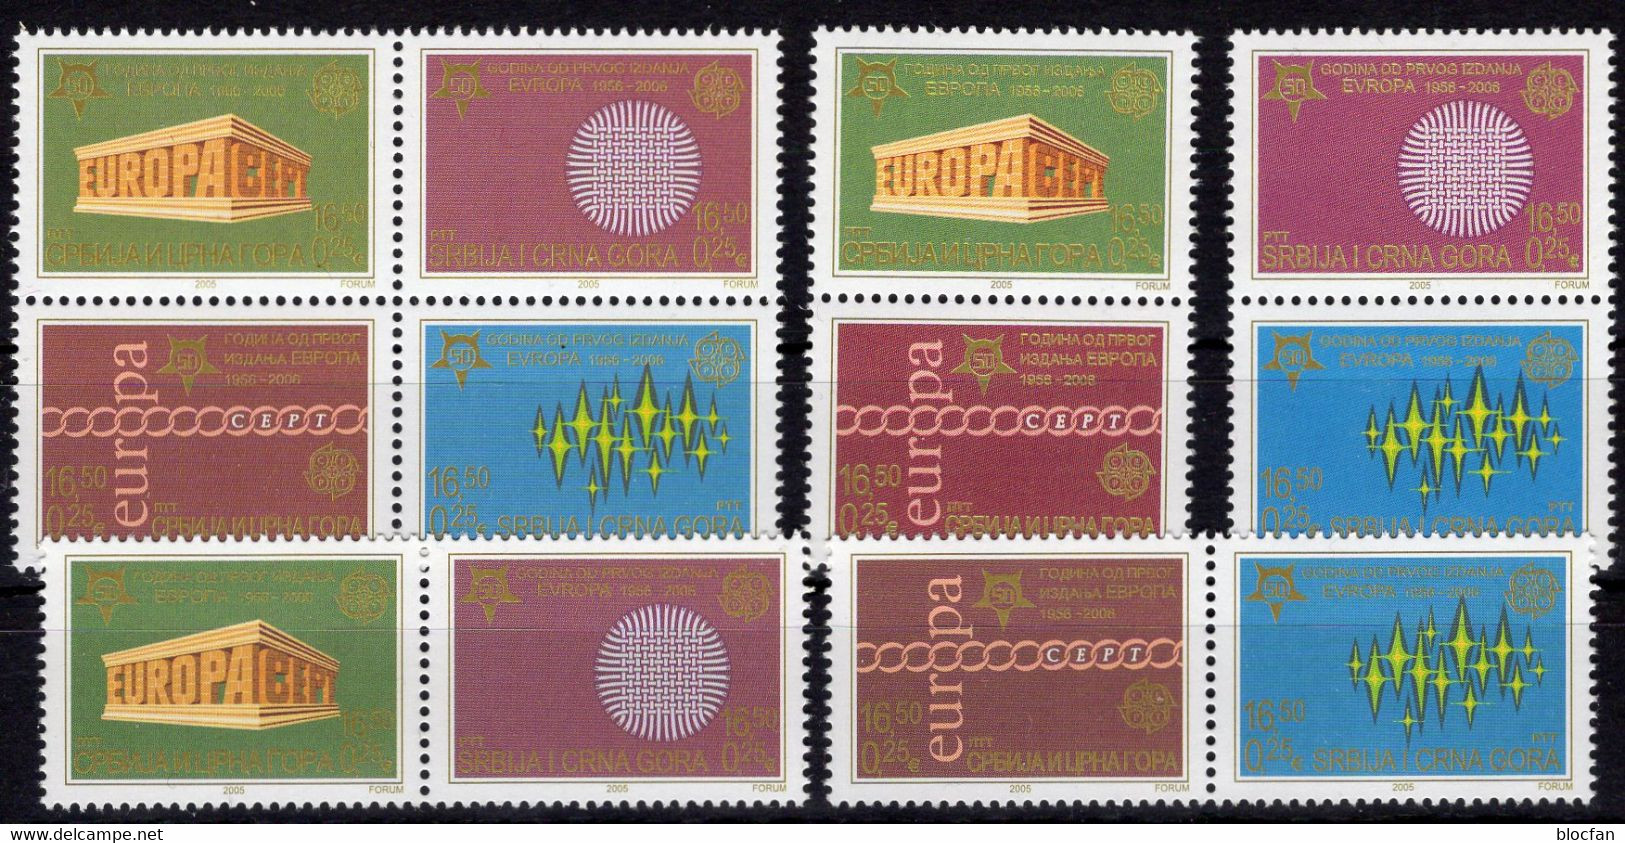 CEPT 2006 Serbia 4ZD+4-Block A ** 24€ Stamps On Stamp YU1361 1380 1417 1457 Bloc Hoja Bloque Ms Se-tenant Bf EUROPA - Lots & Serien